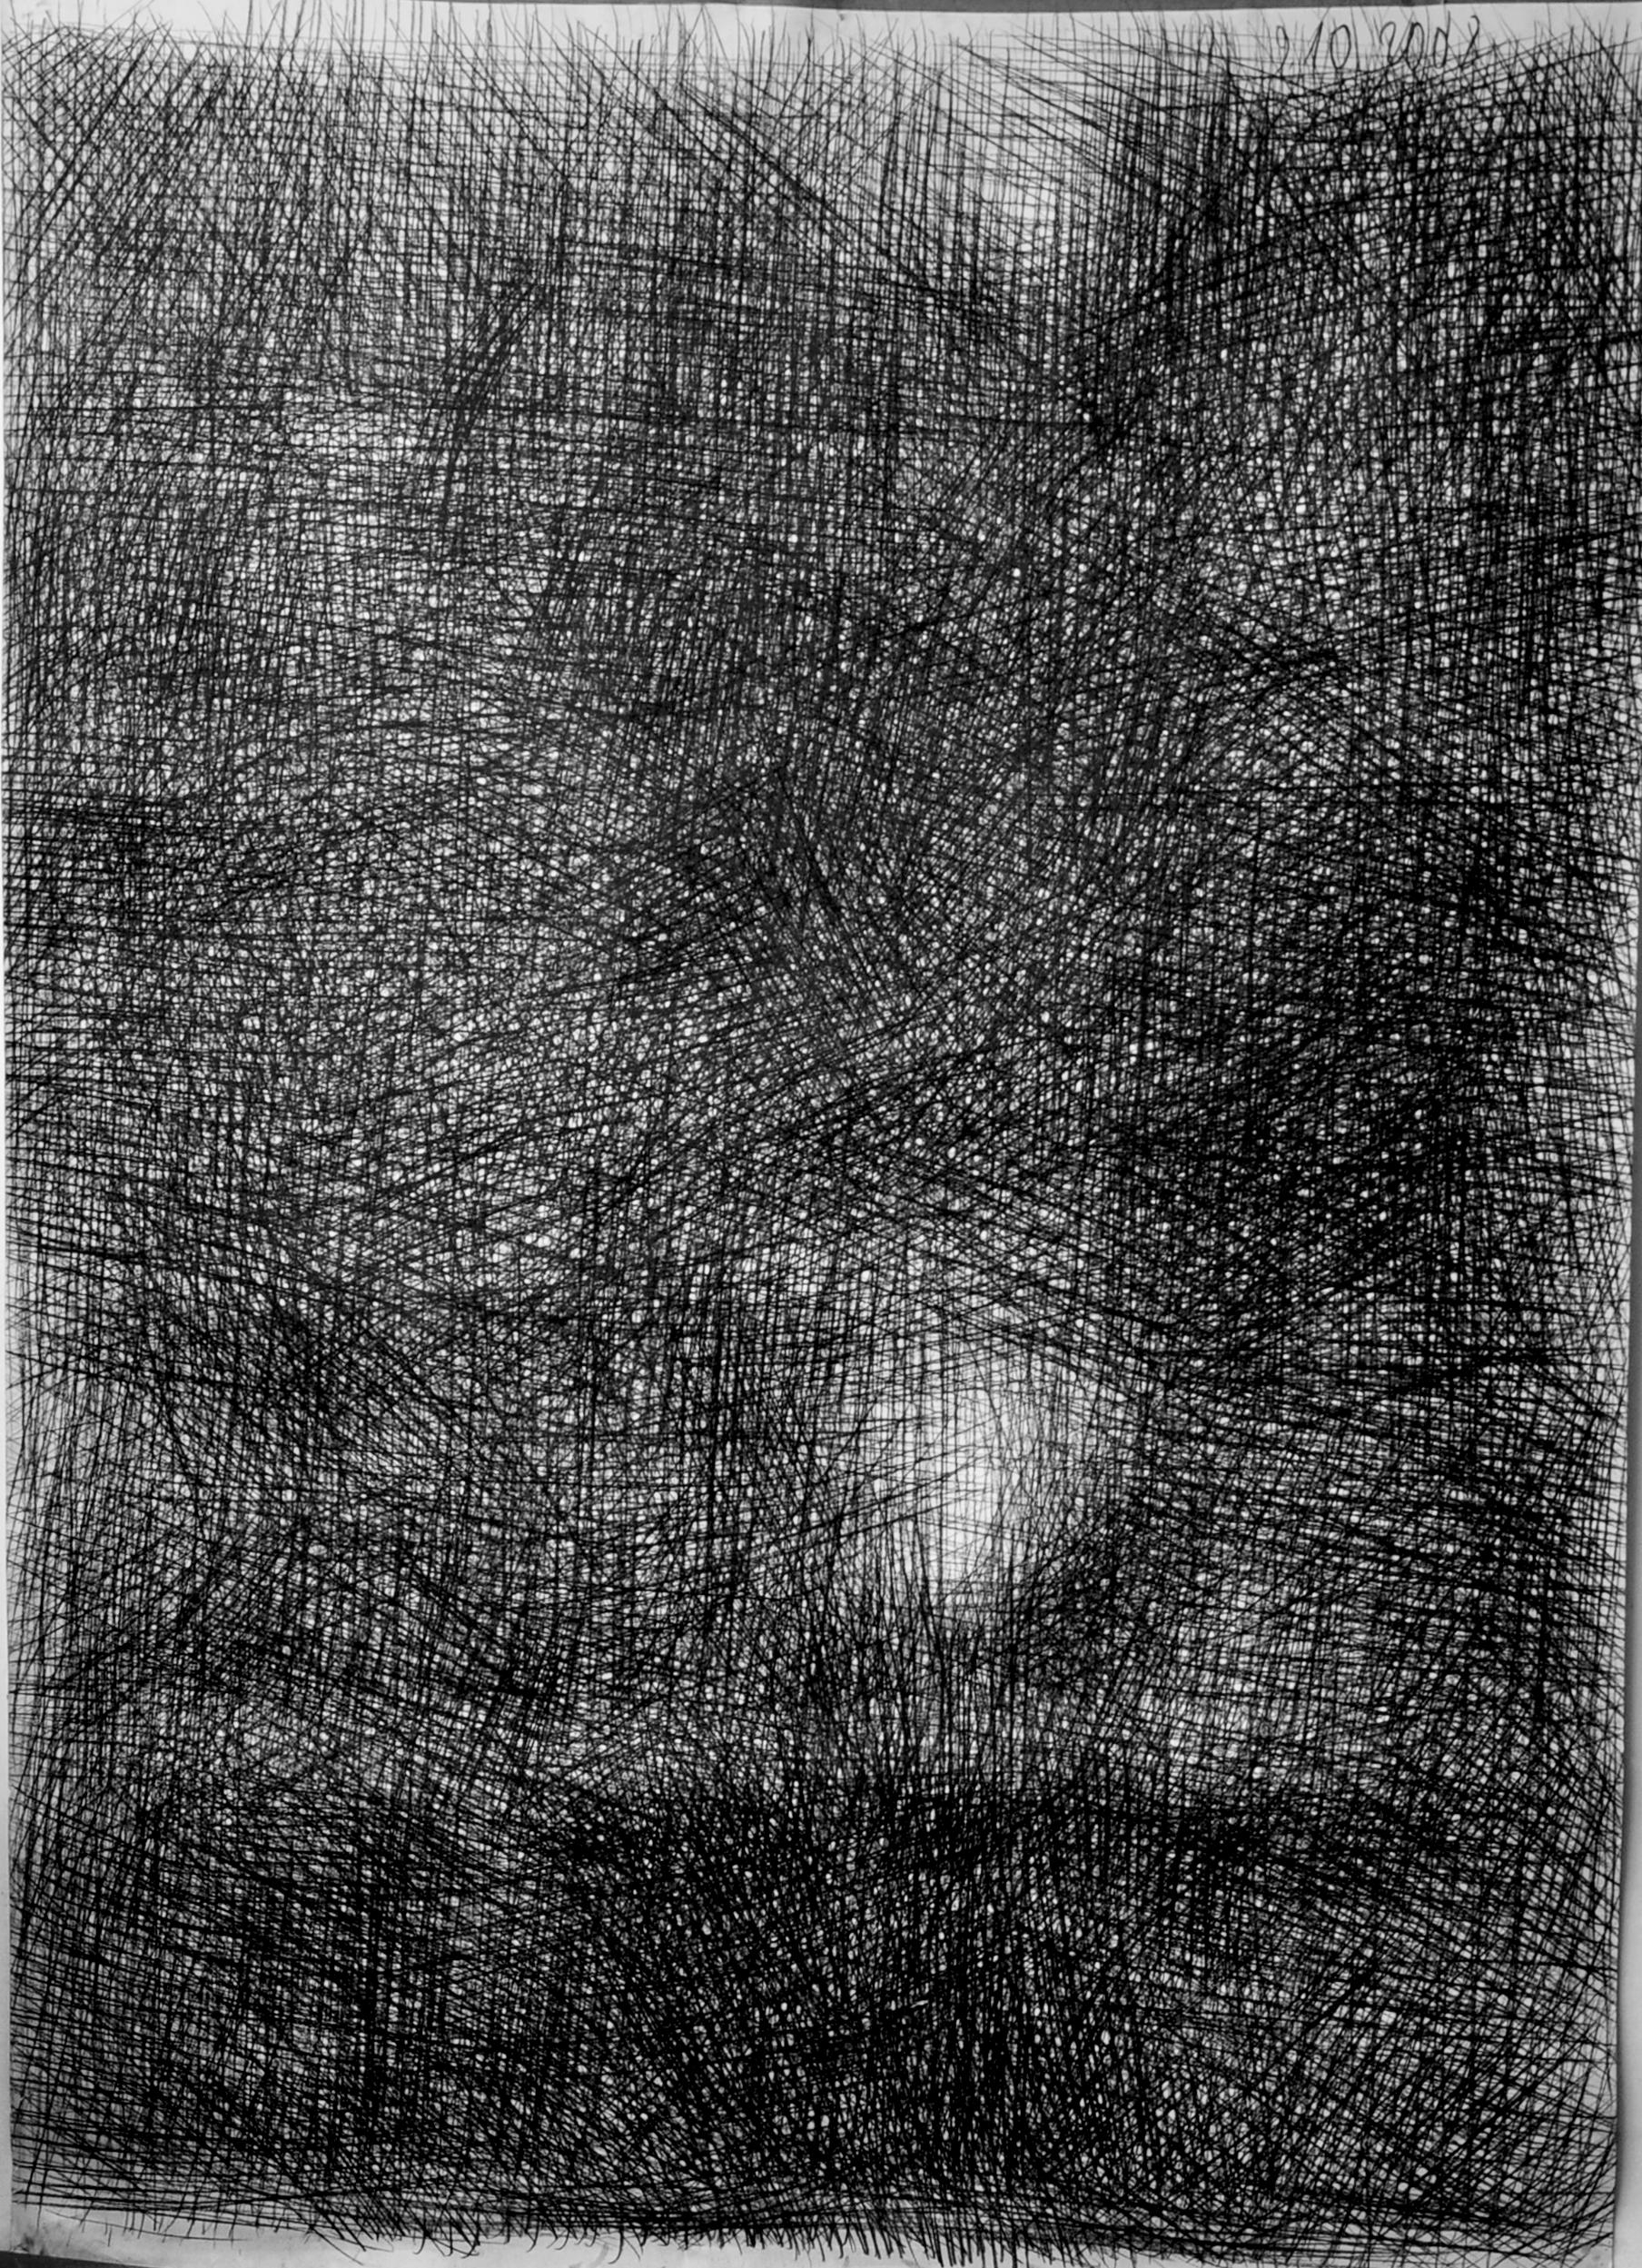 Krzysztof Gliszczyński Abstract Drawing - Light, Series Drawing From Israel - Large Format, Charcoal On Paper